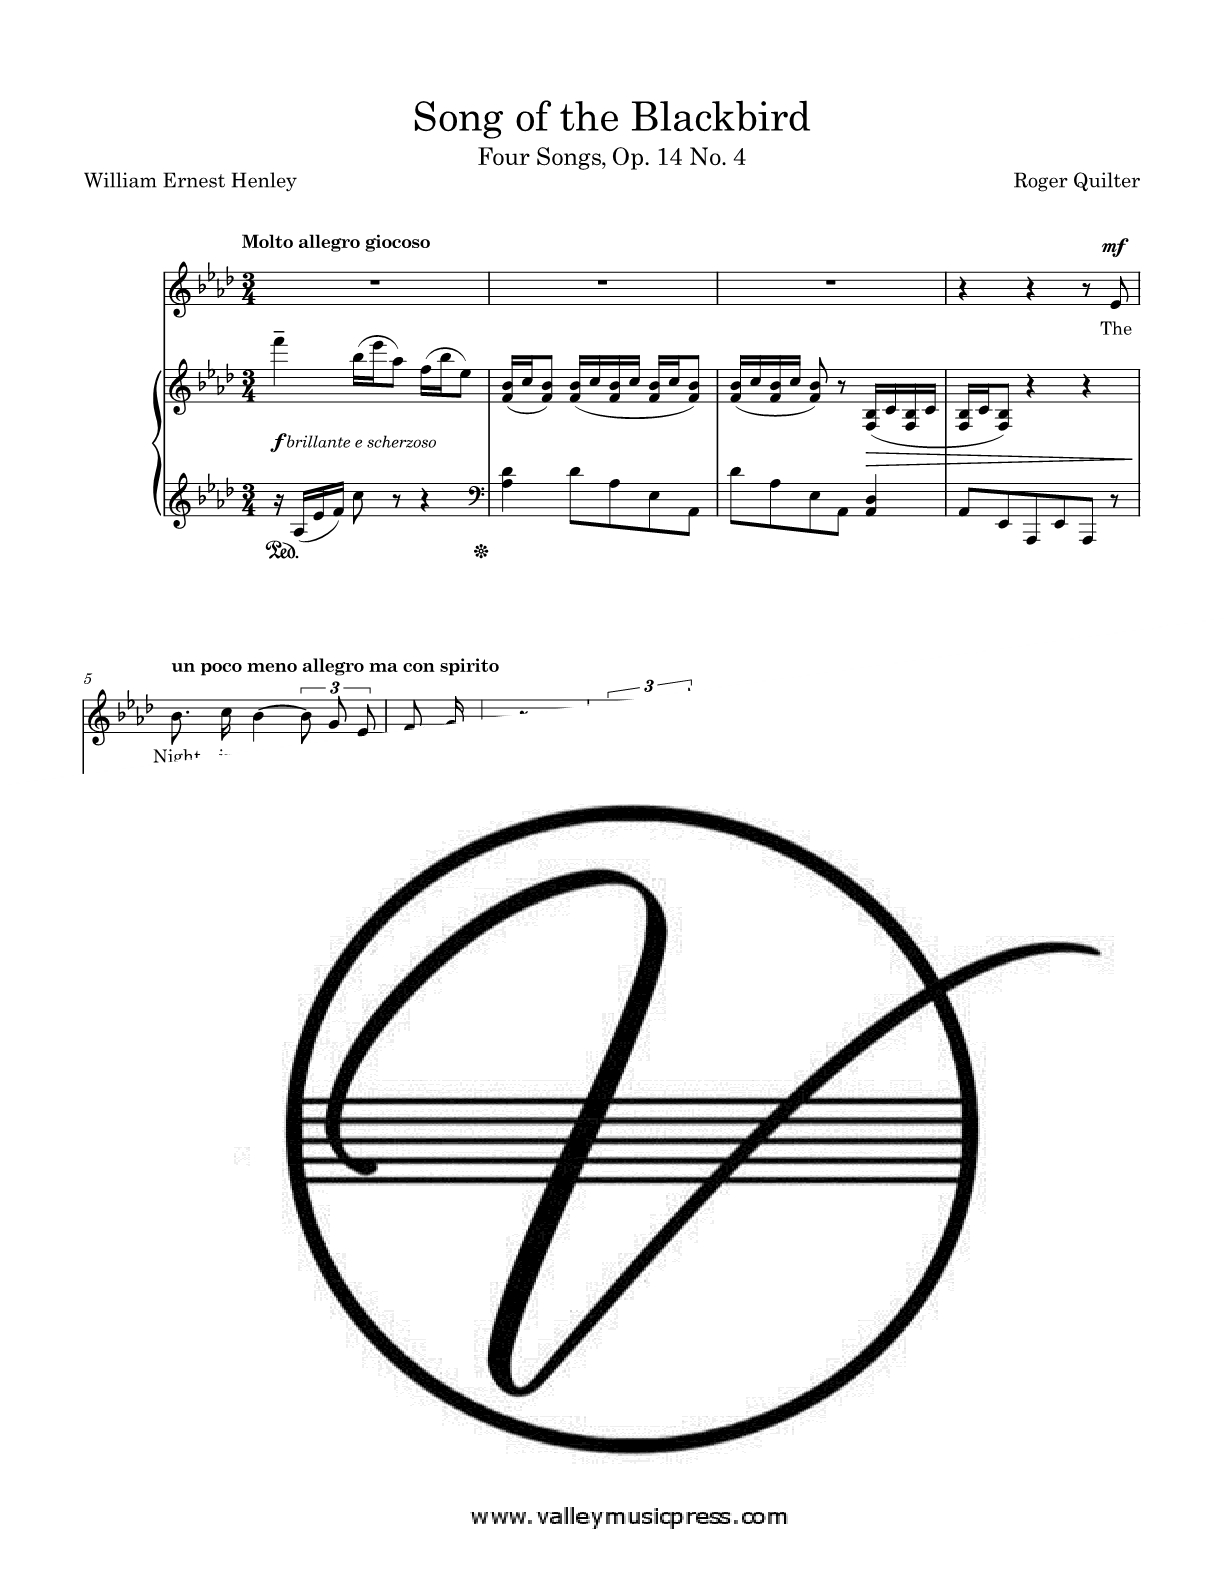 Quilter - Song of the Blackbird Op. 14 No. 4 (Voice) - Click Image to Close